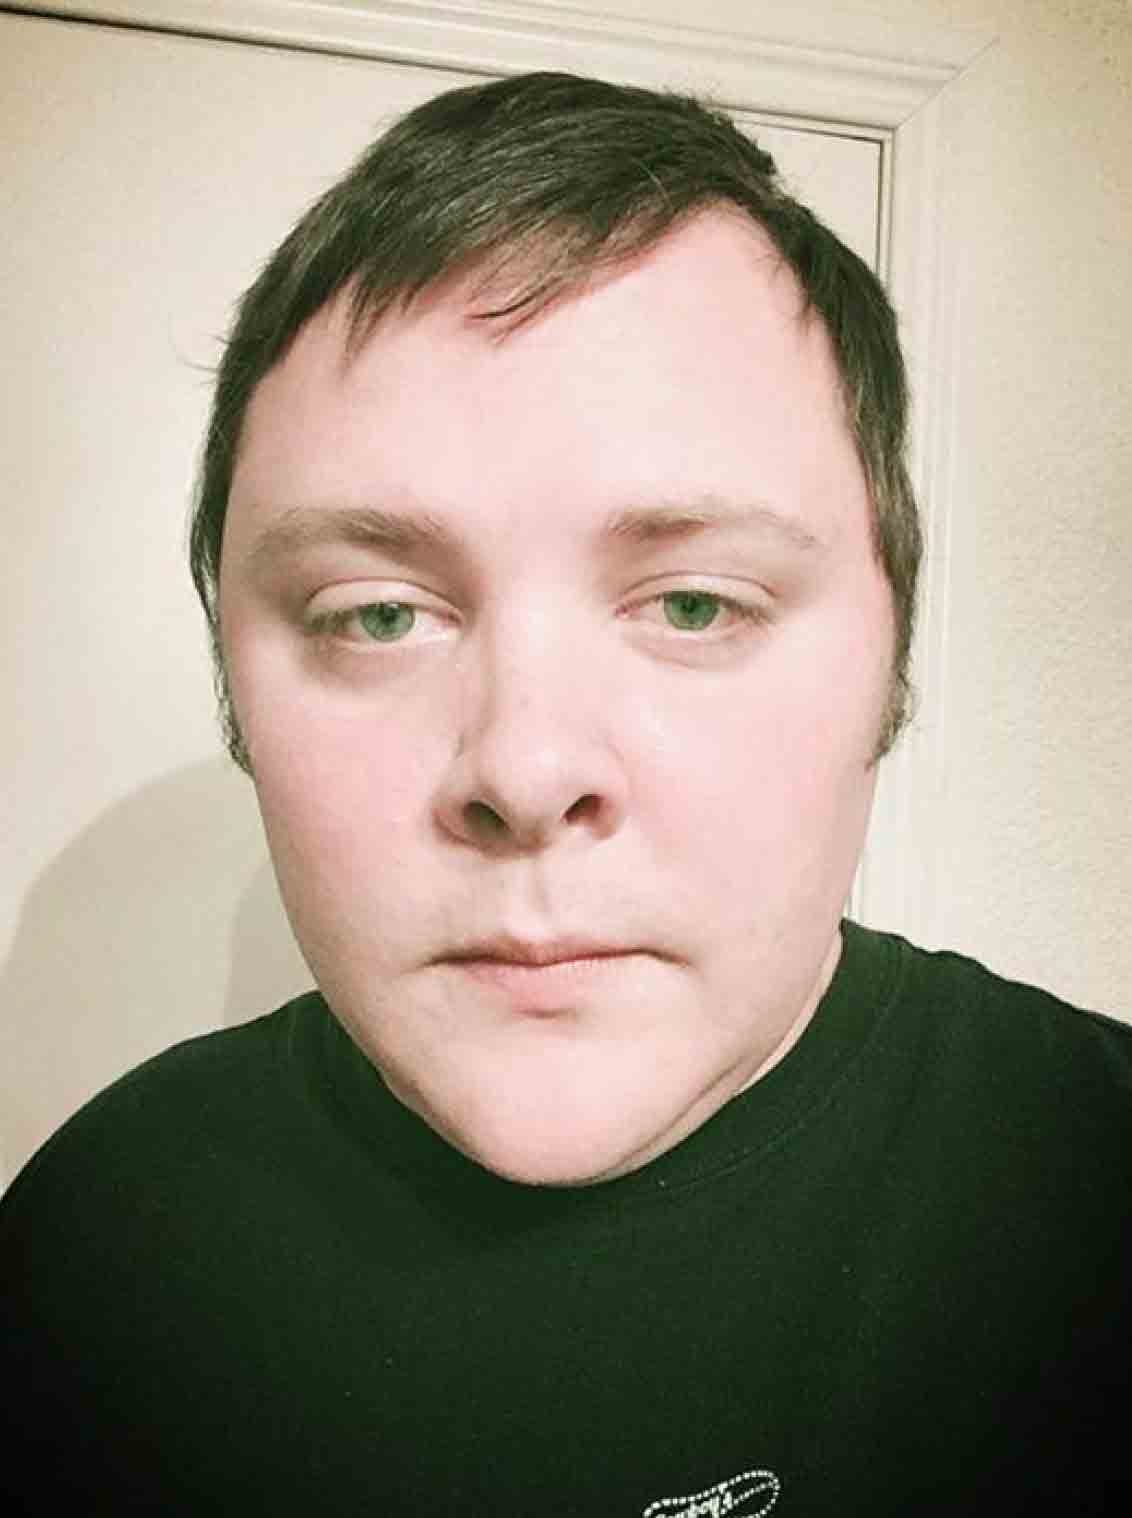 Texas Church Shooter Reportedly ID'd As Air Force Vet, 26, Once Accused Of Assaulting Spouse
